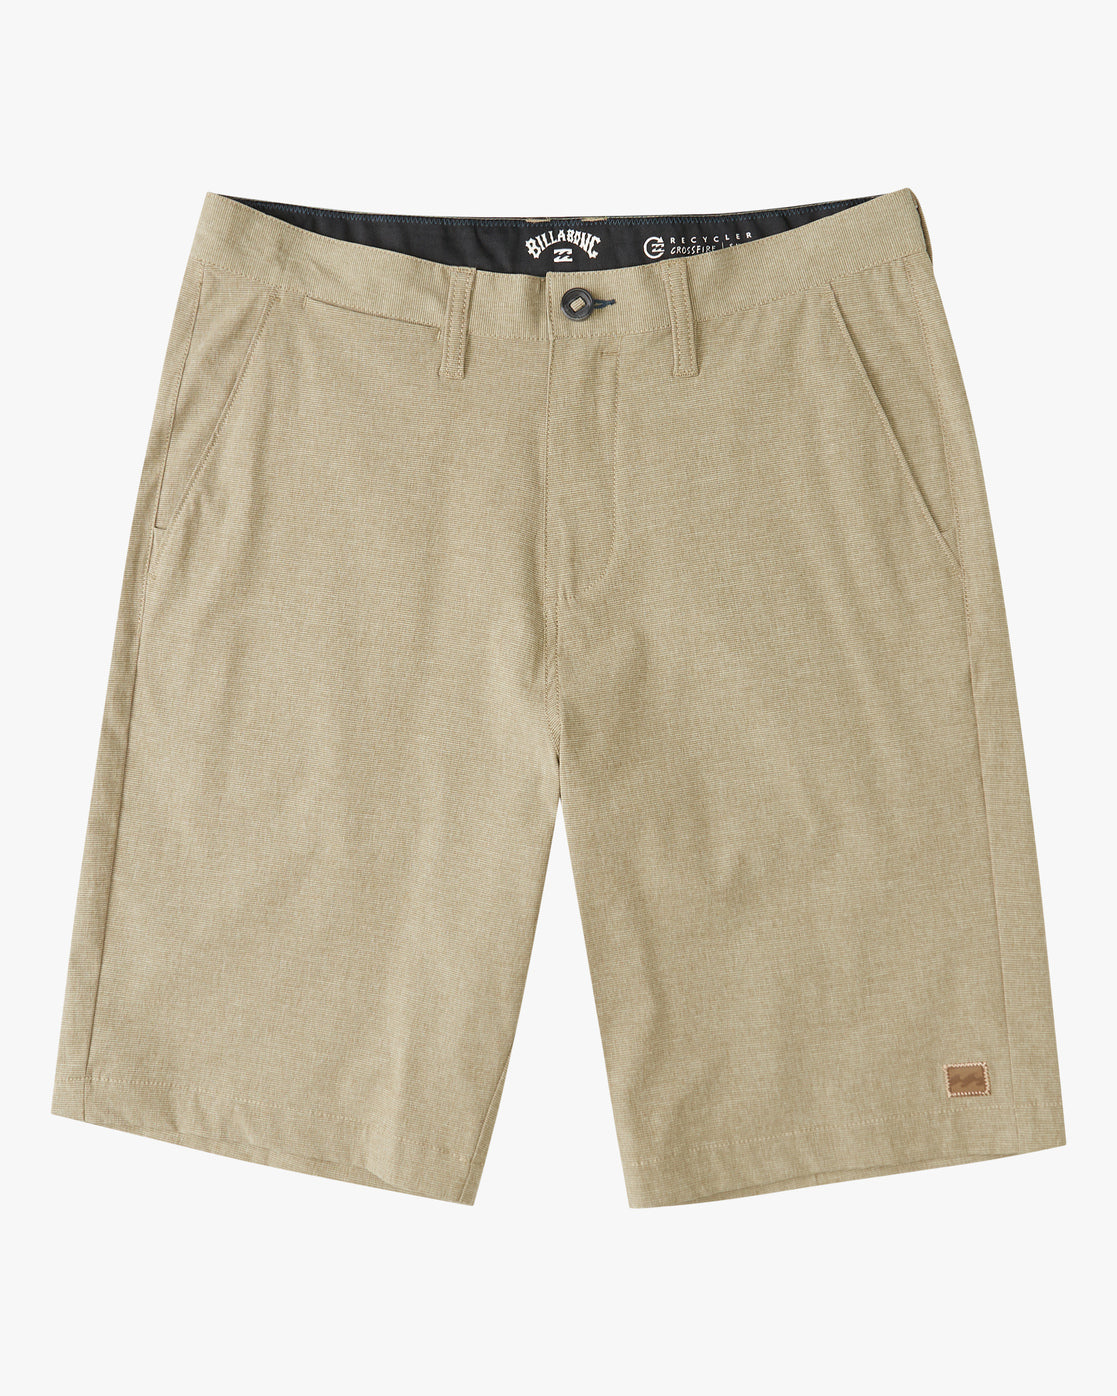 Crossfire Submersible Shorts 21" - ABYWS00109